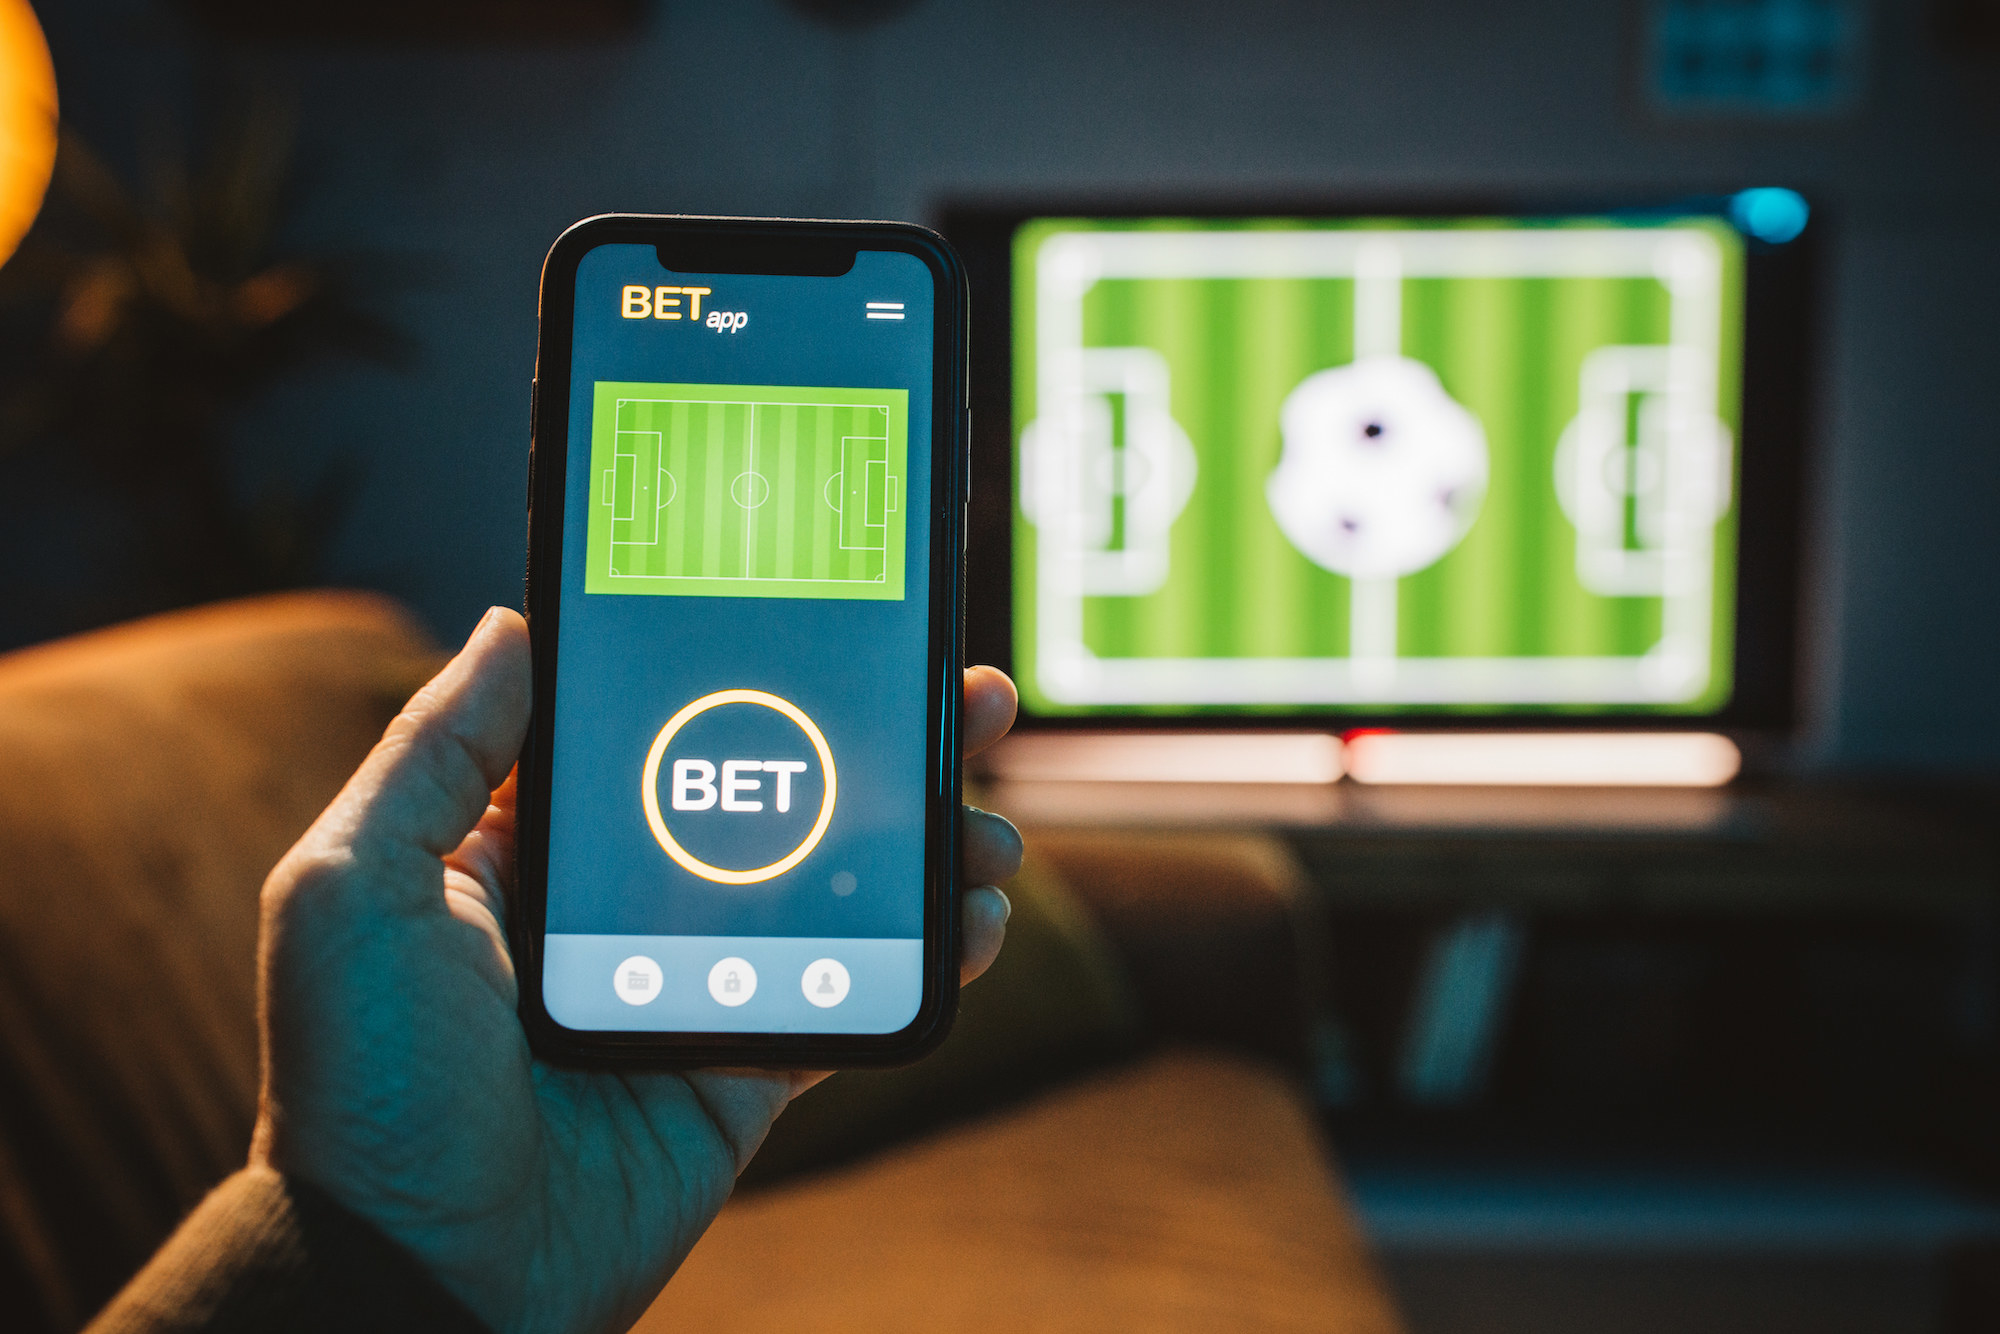 A phone with a betting app